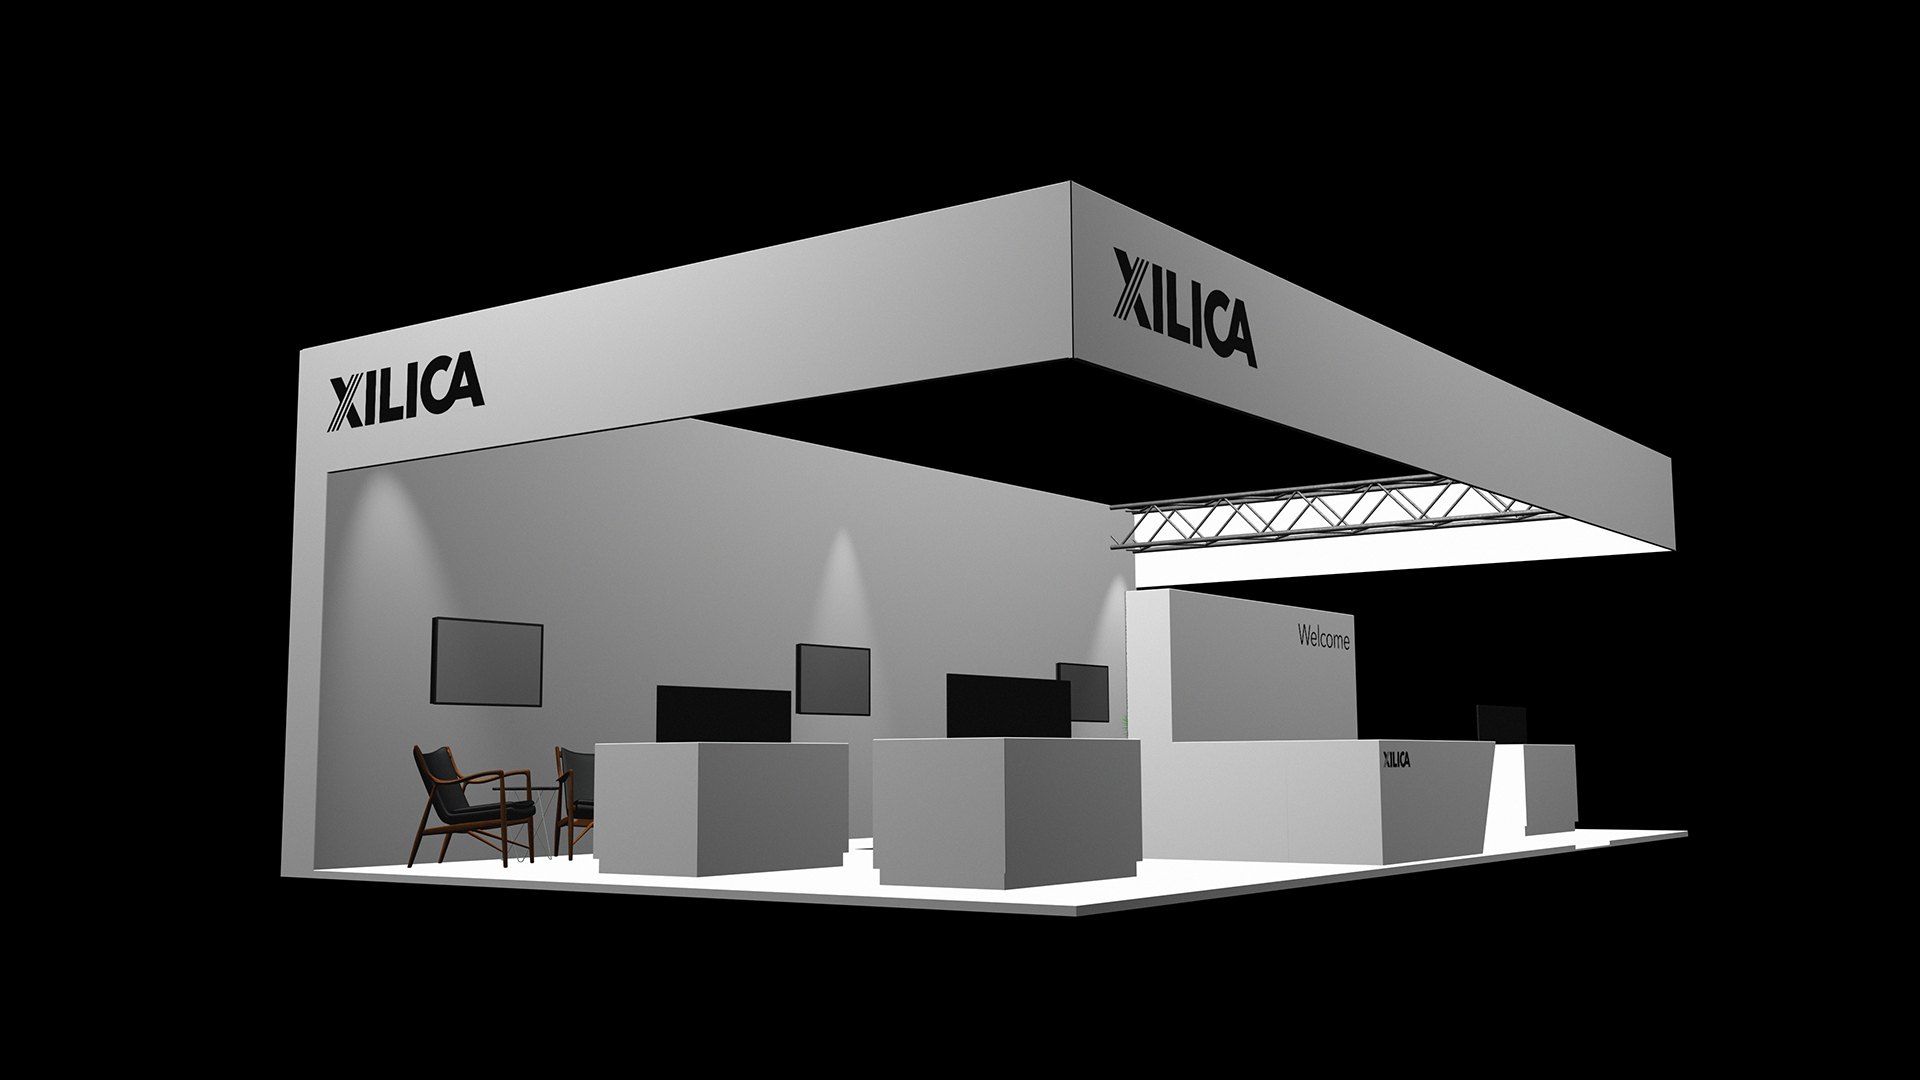 Simple three dimensional event stand designs which help the client visualise their sales environment.